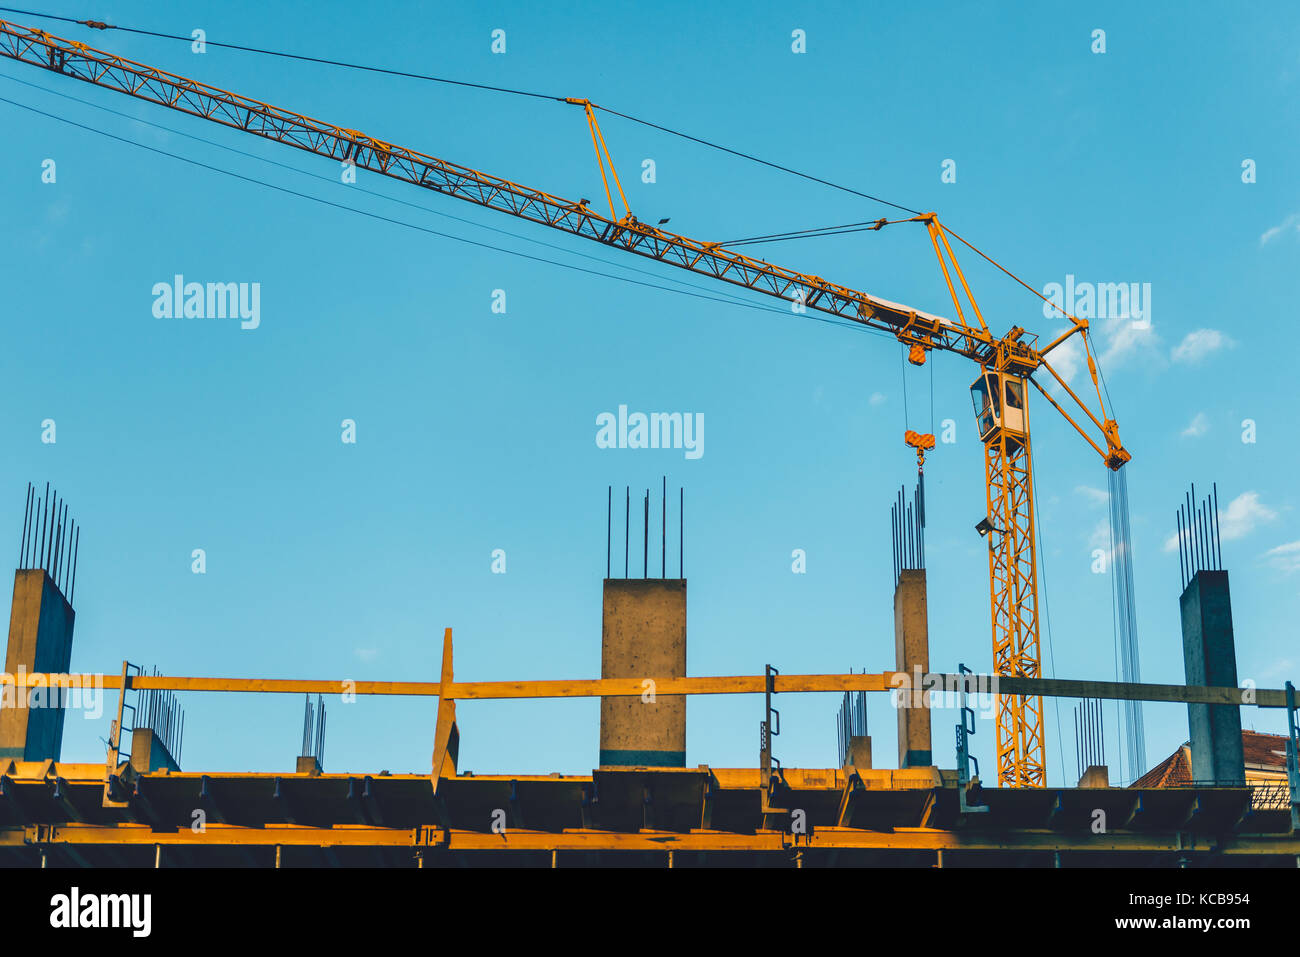 Construction site with tower crane Stock Photo